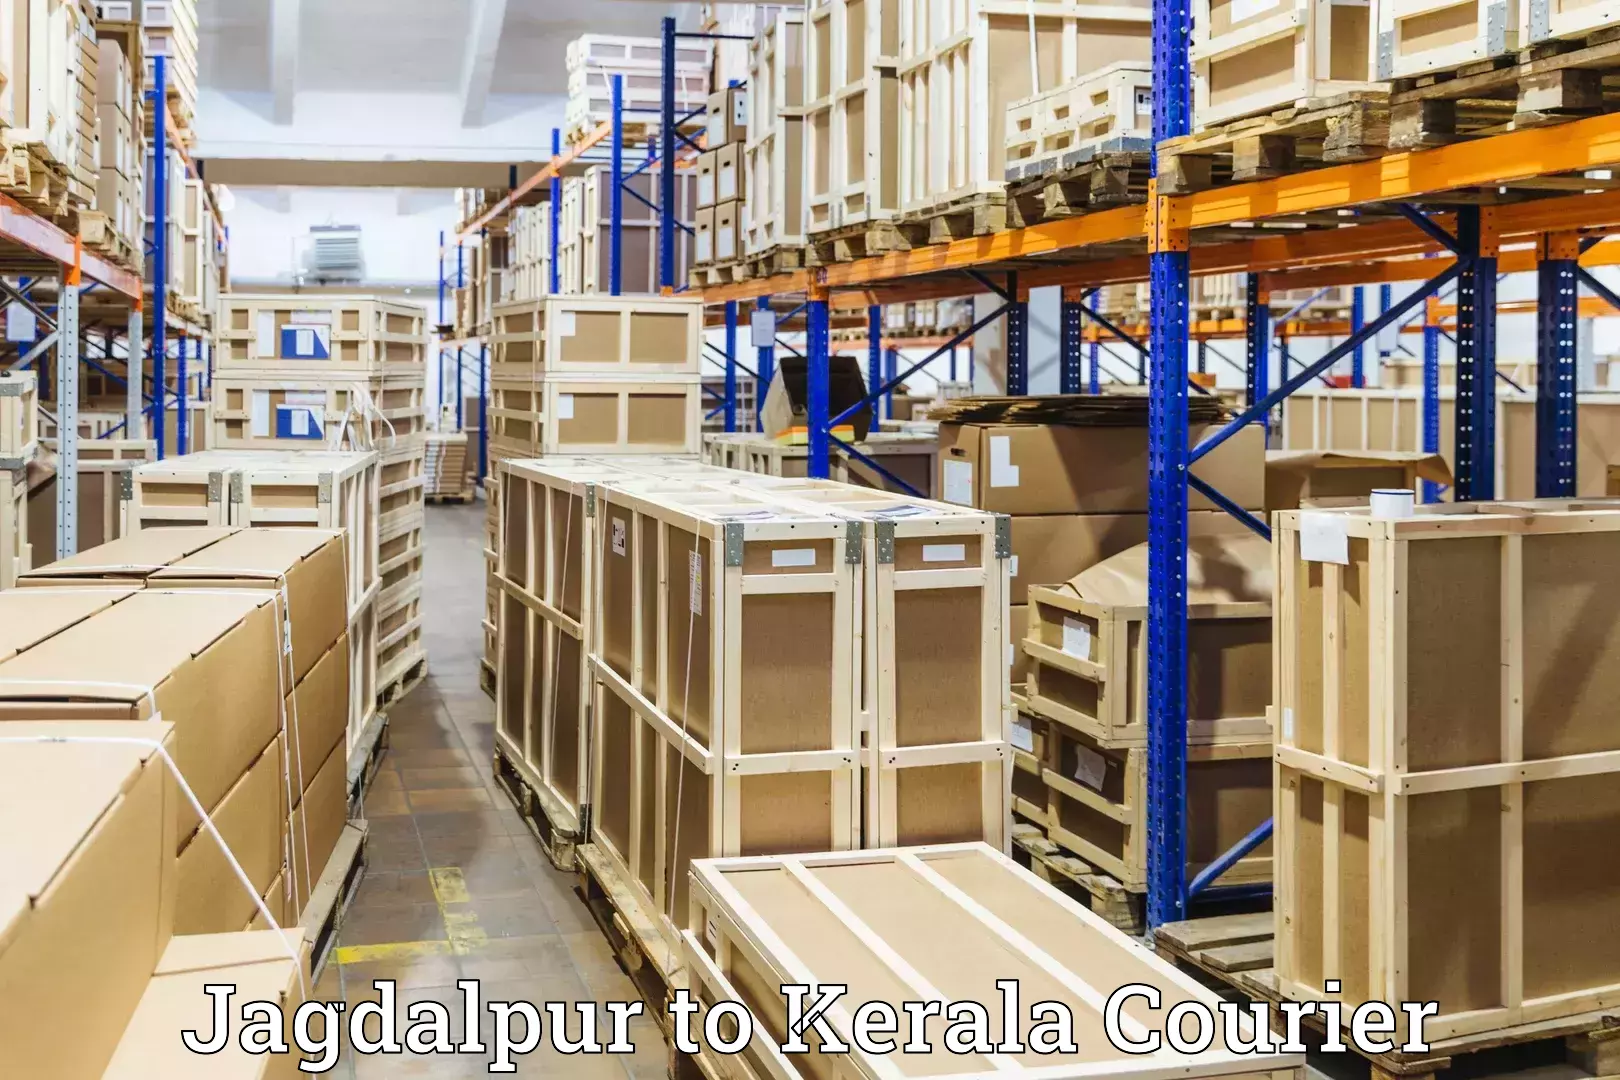 Luggage transport company Jagdalpur to Cochin University of Science and Technology